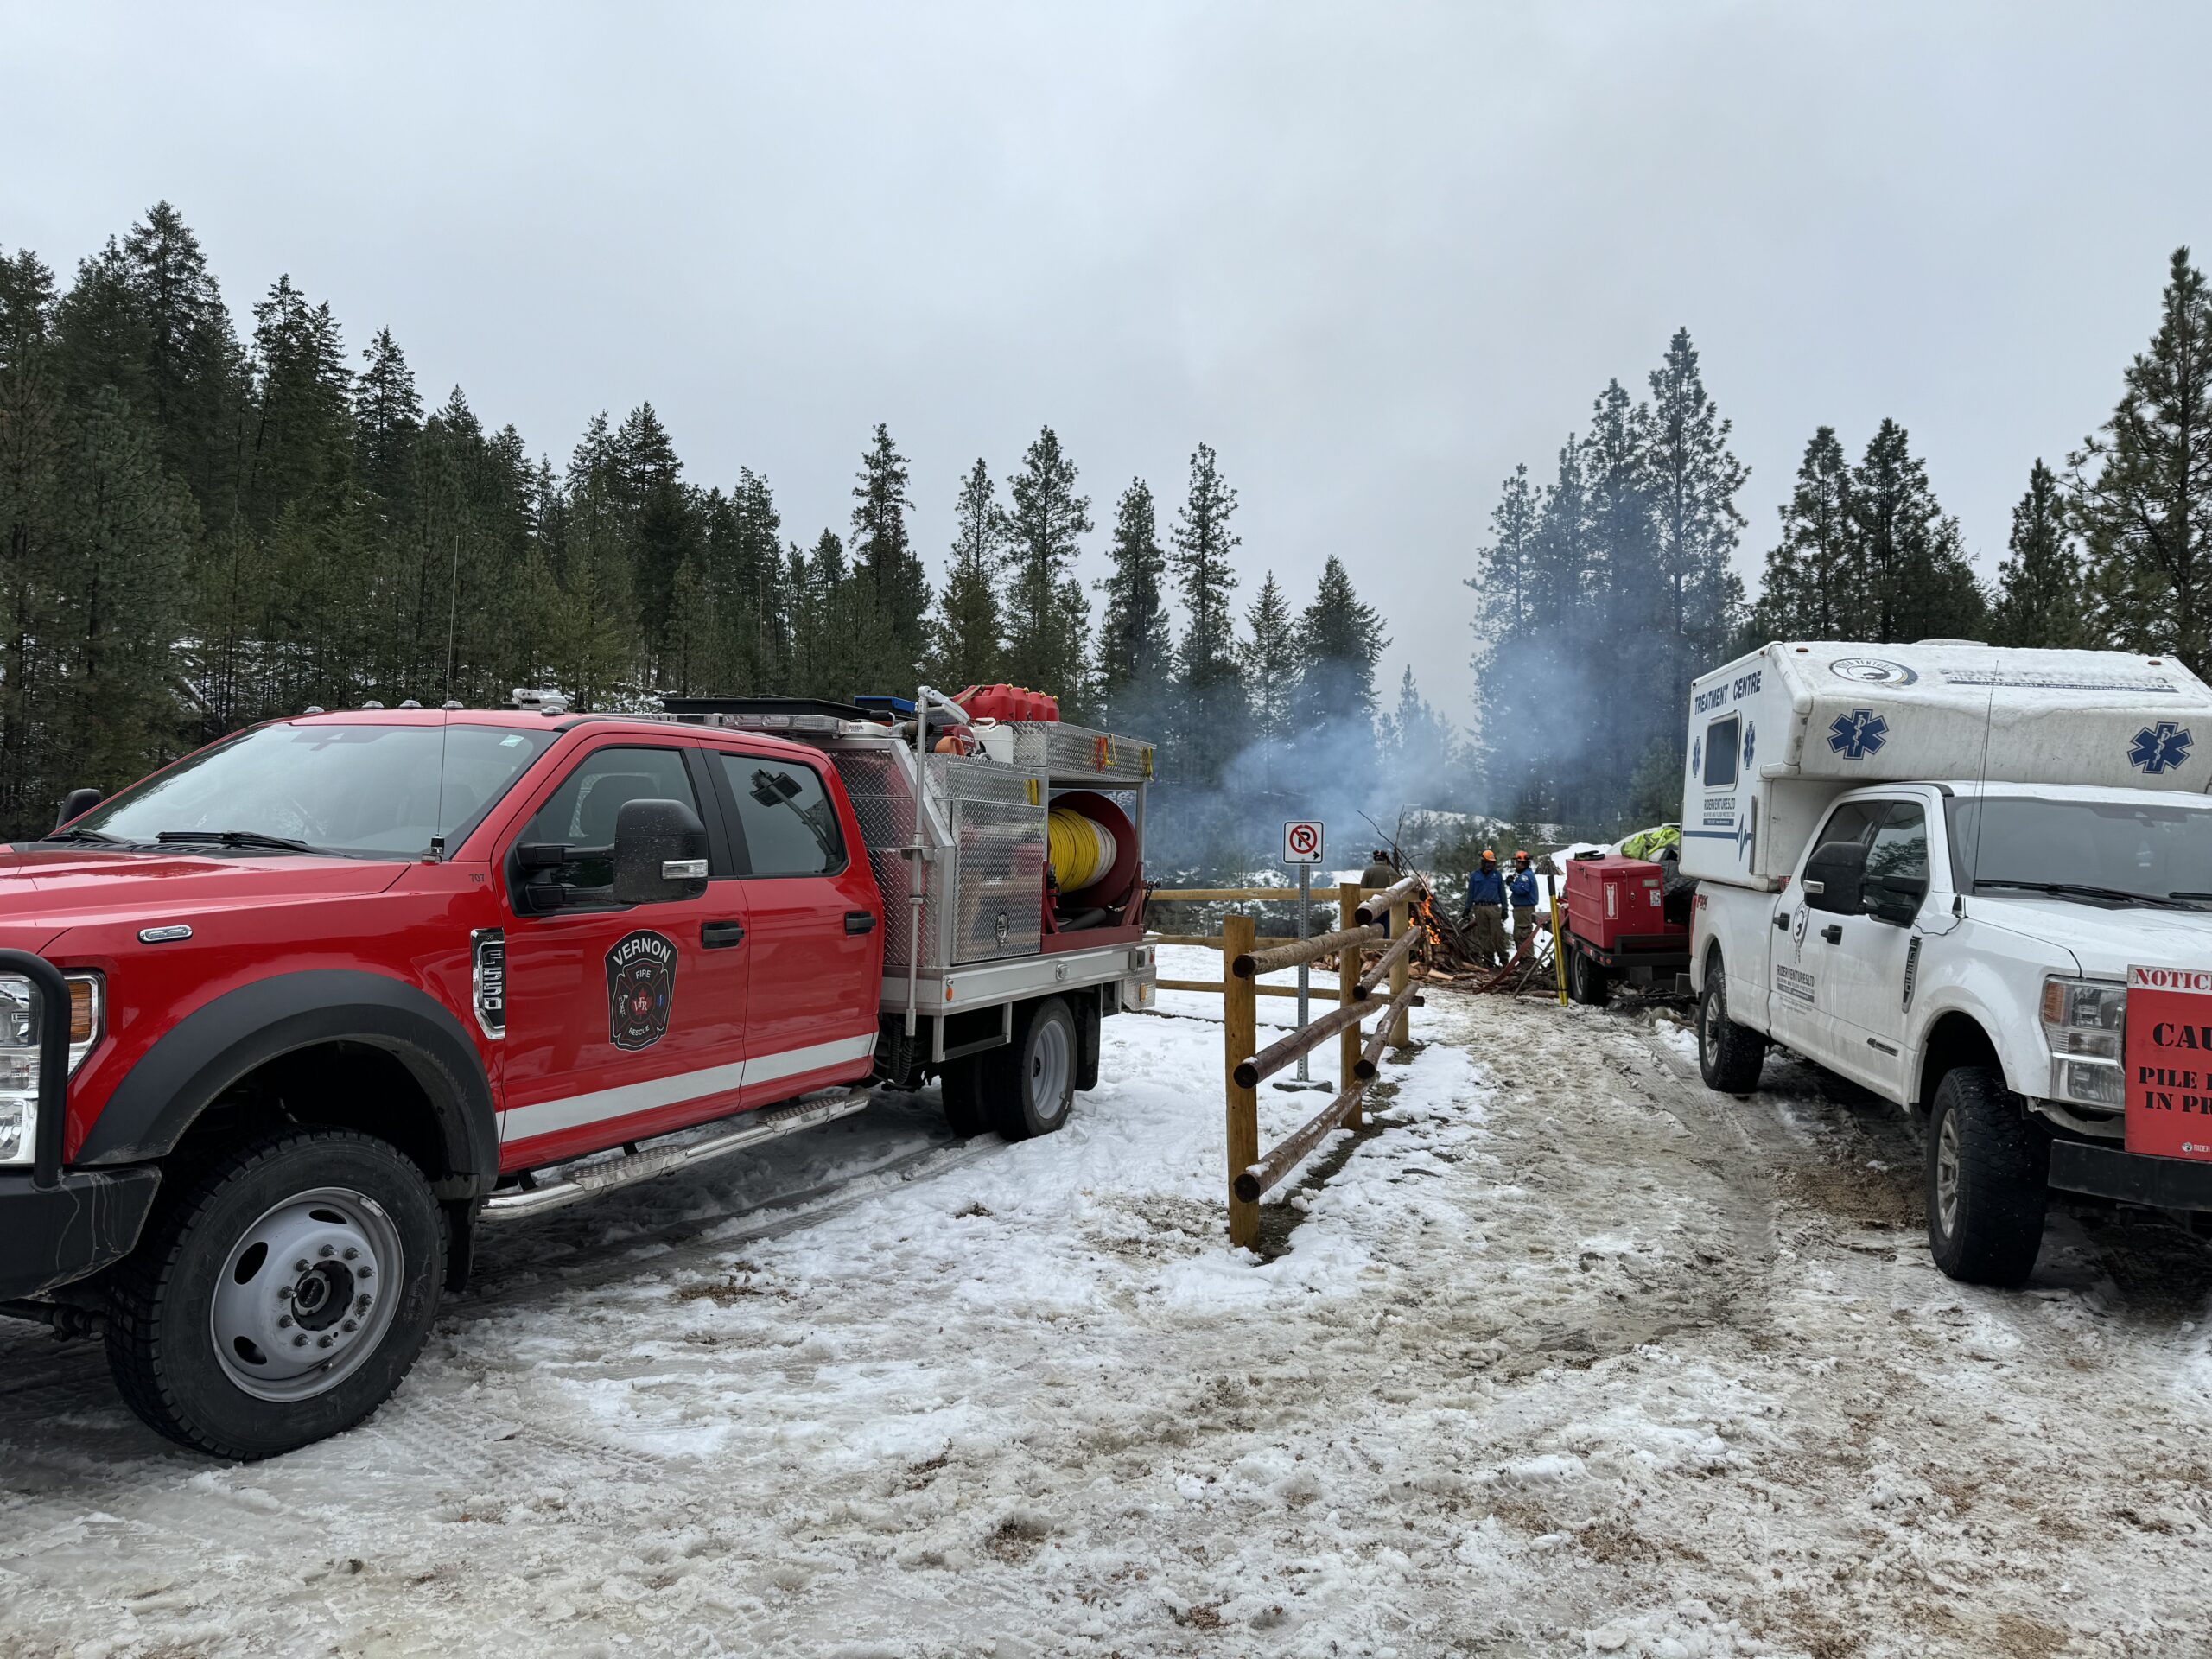 SenseNet’s FireWard technology revealed in Vernon, showcasing the synergy of local emergency services with innovative wildfire detection systems.